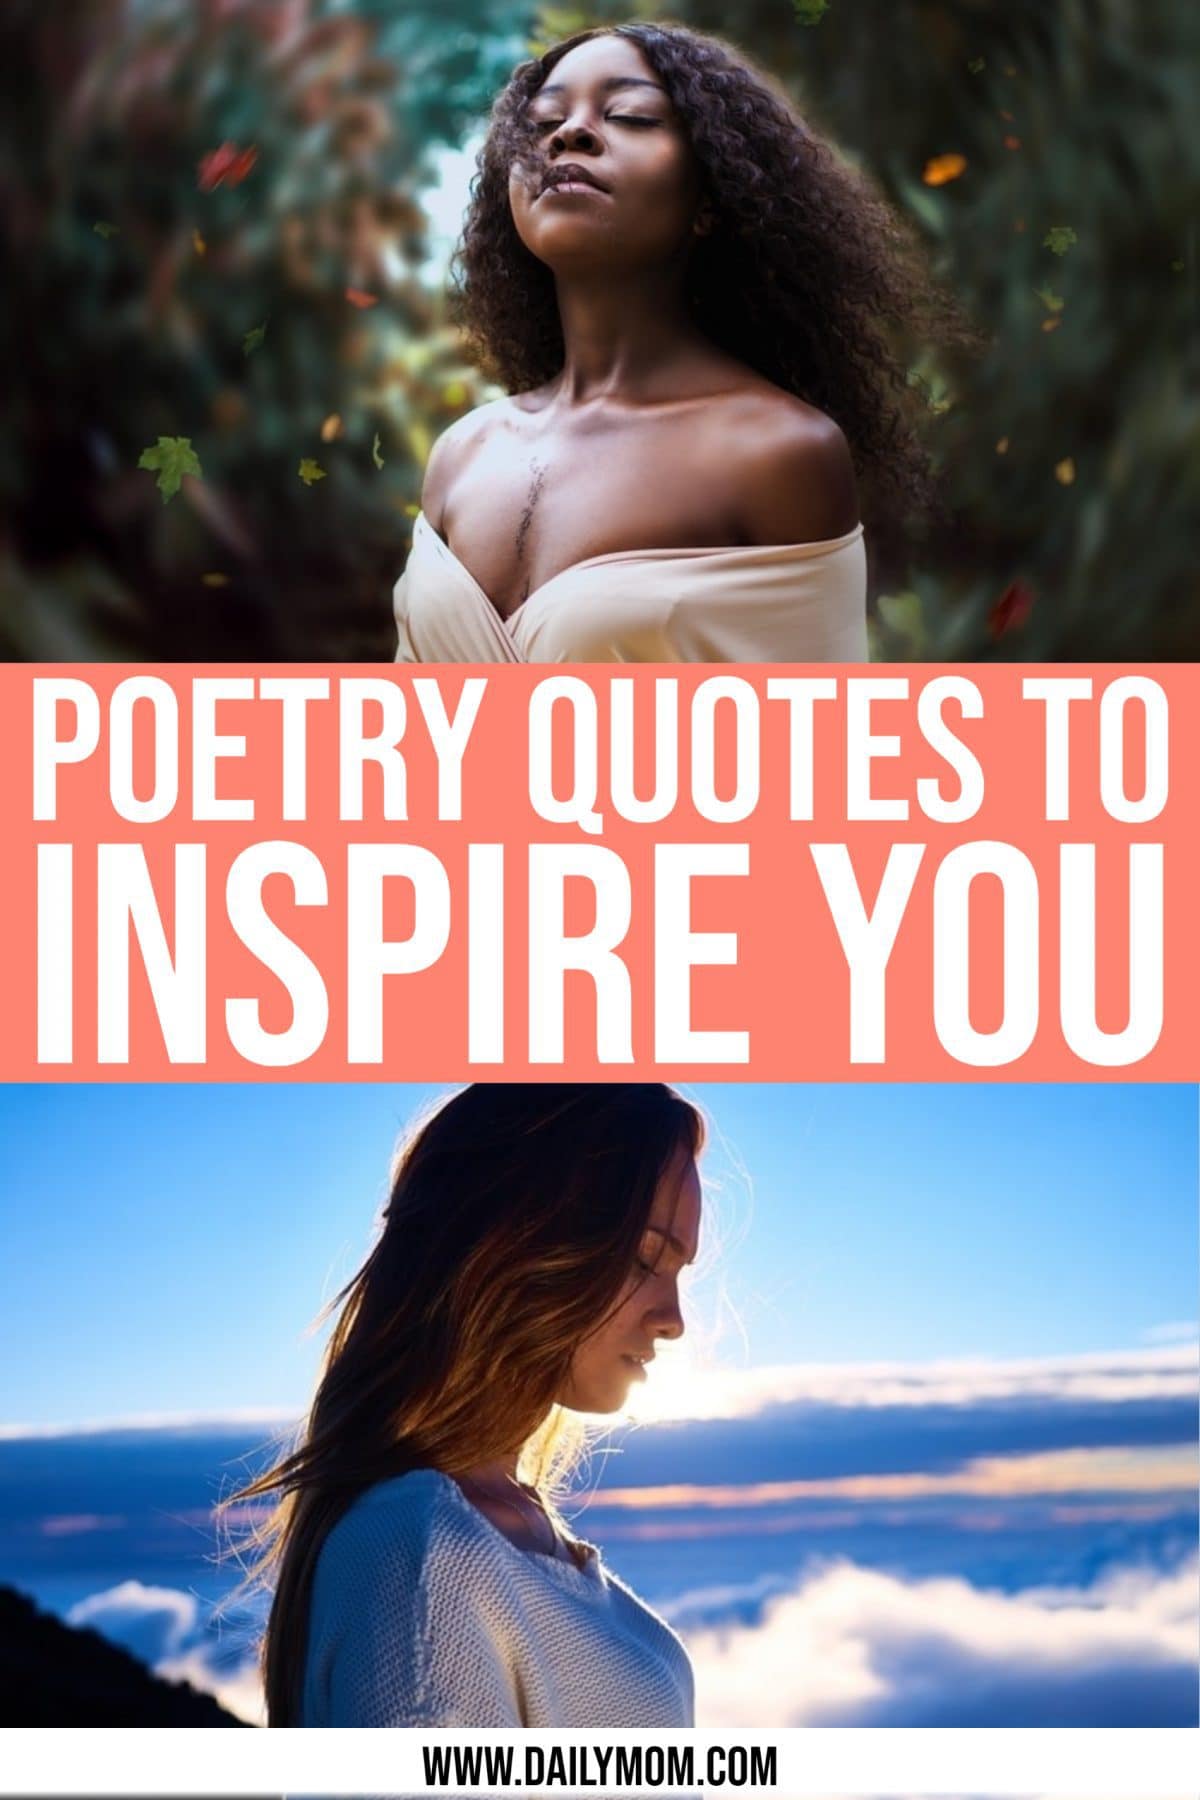 10 Poetry Quotes To Inspire Your Life